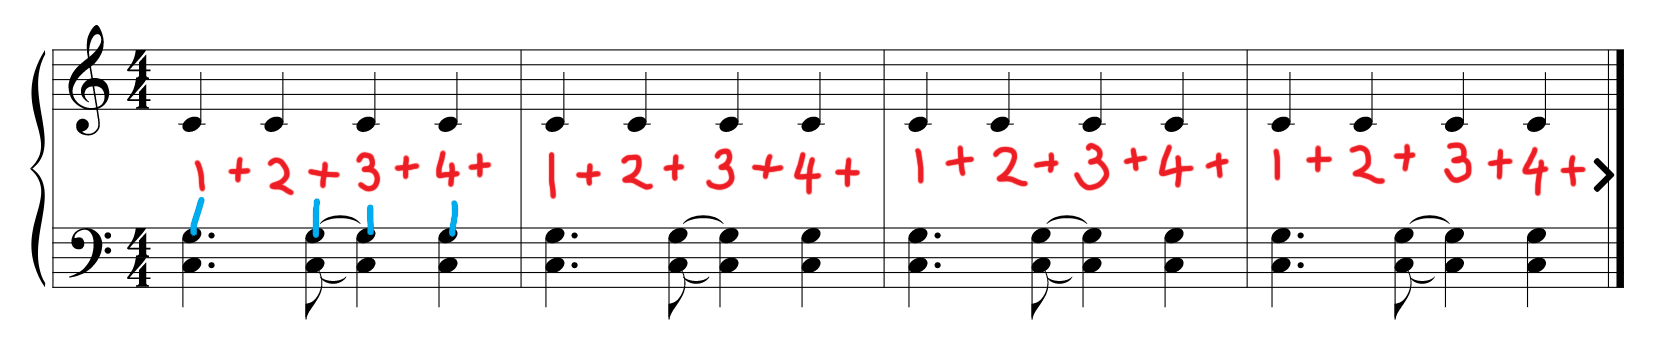 Sheet music for piano exercise no. 2 with mark-up. Counting is added and matched to respective notes.